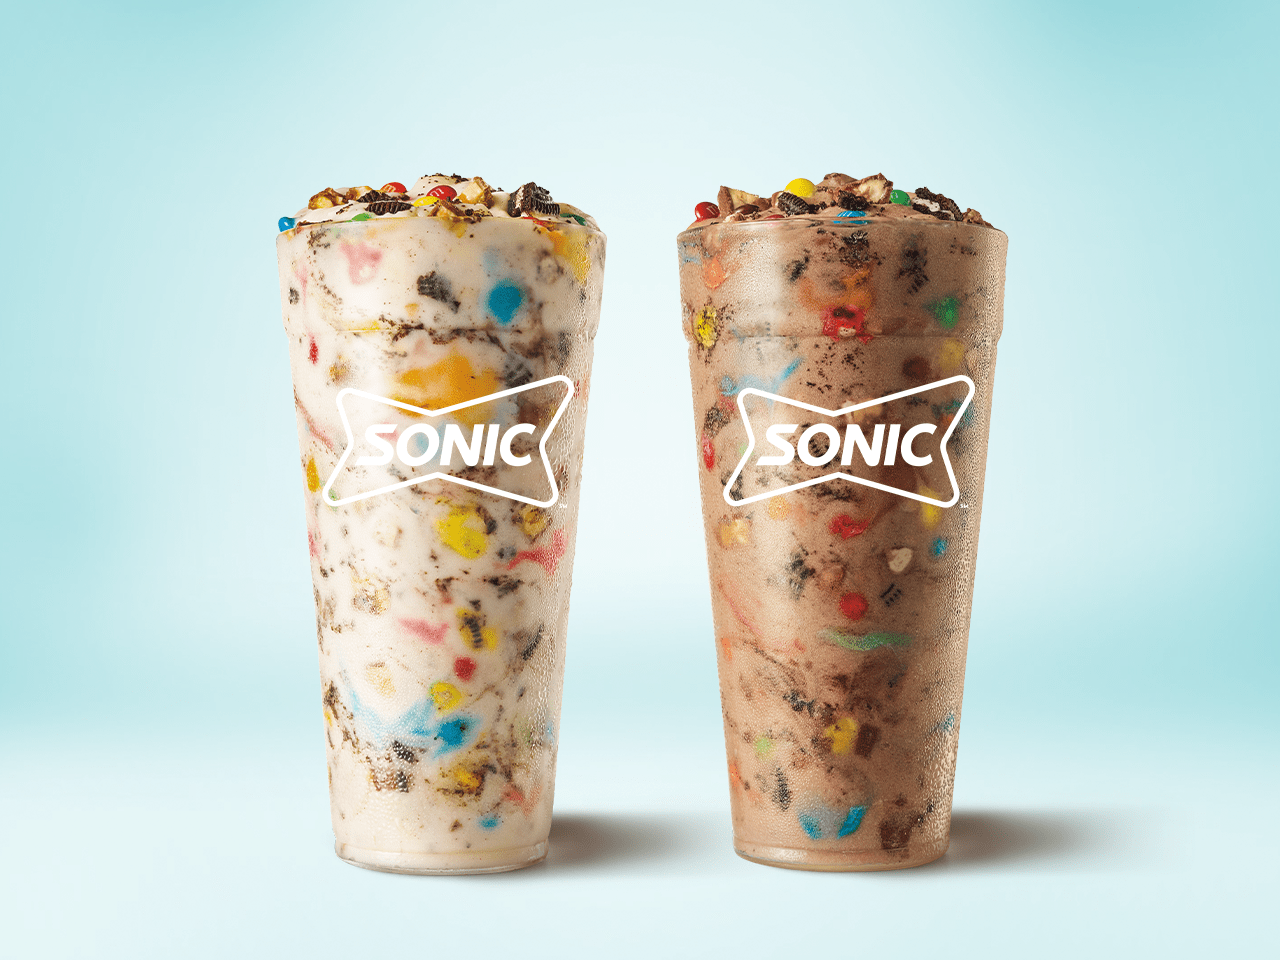 Sonic Just Introduced New Trick or Treat Blast Milkshakes For Halloween And I Want Them Now